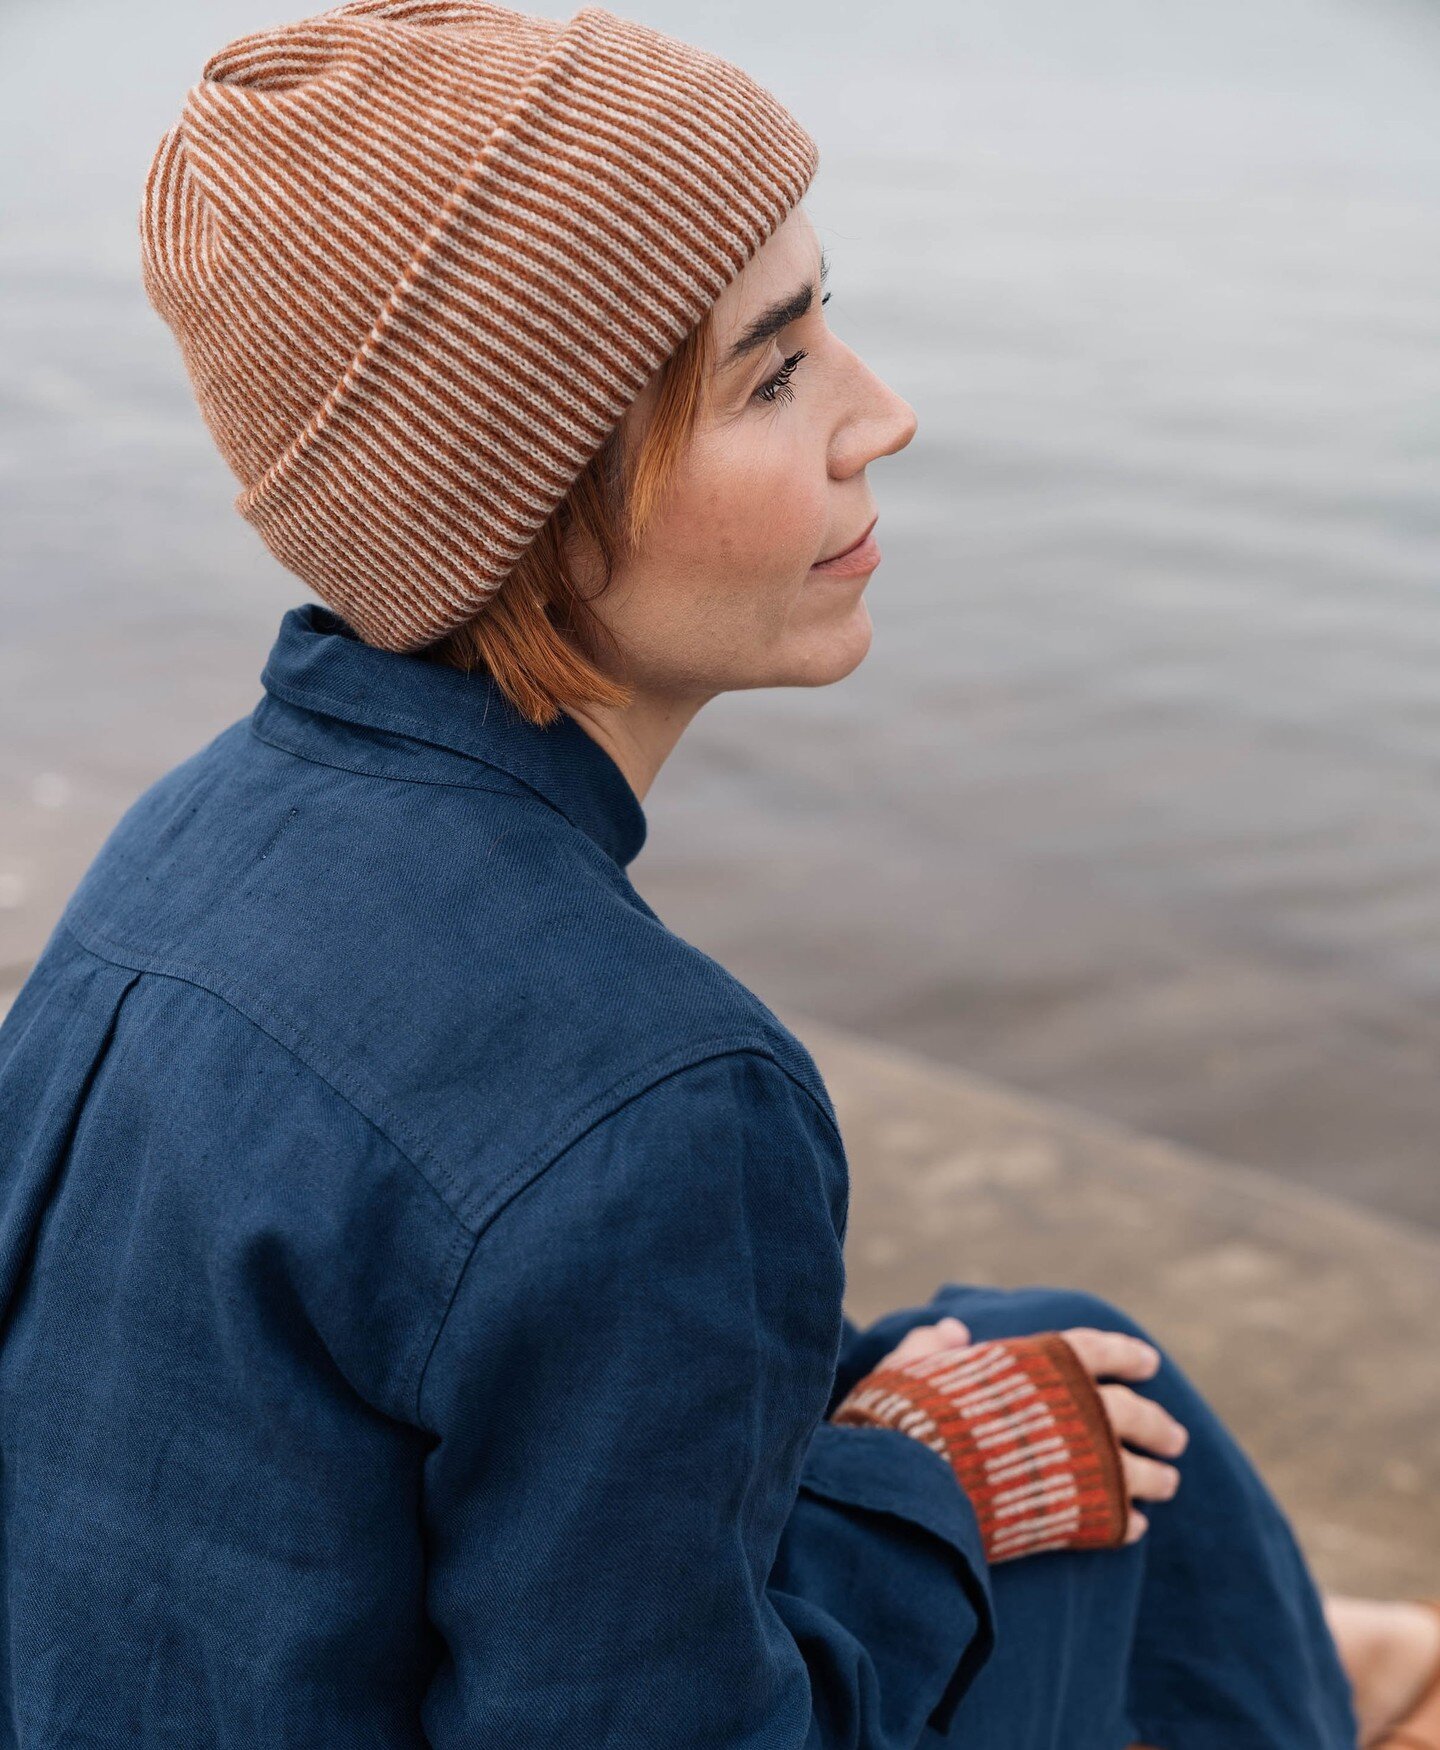 Looking forward to enjoying some welcome warmth, light and Spring sunshine after the seemingly endless drizzle, mizzle and murk of the past few weeks and months. 

Shown here the chestnut lambswool Stripe Hat and Lundy Fingerless Gloves paired with a